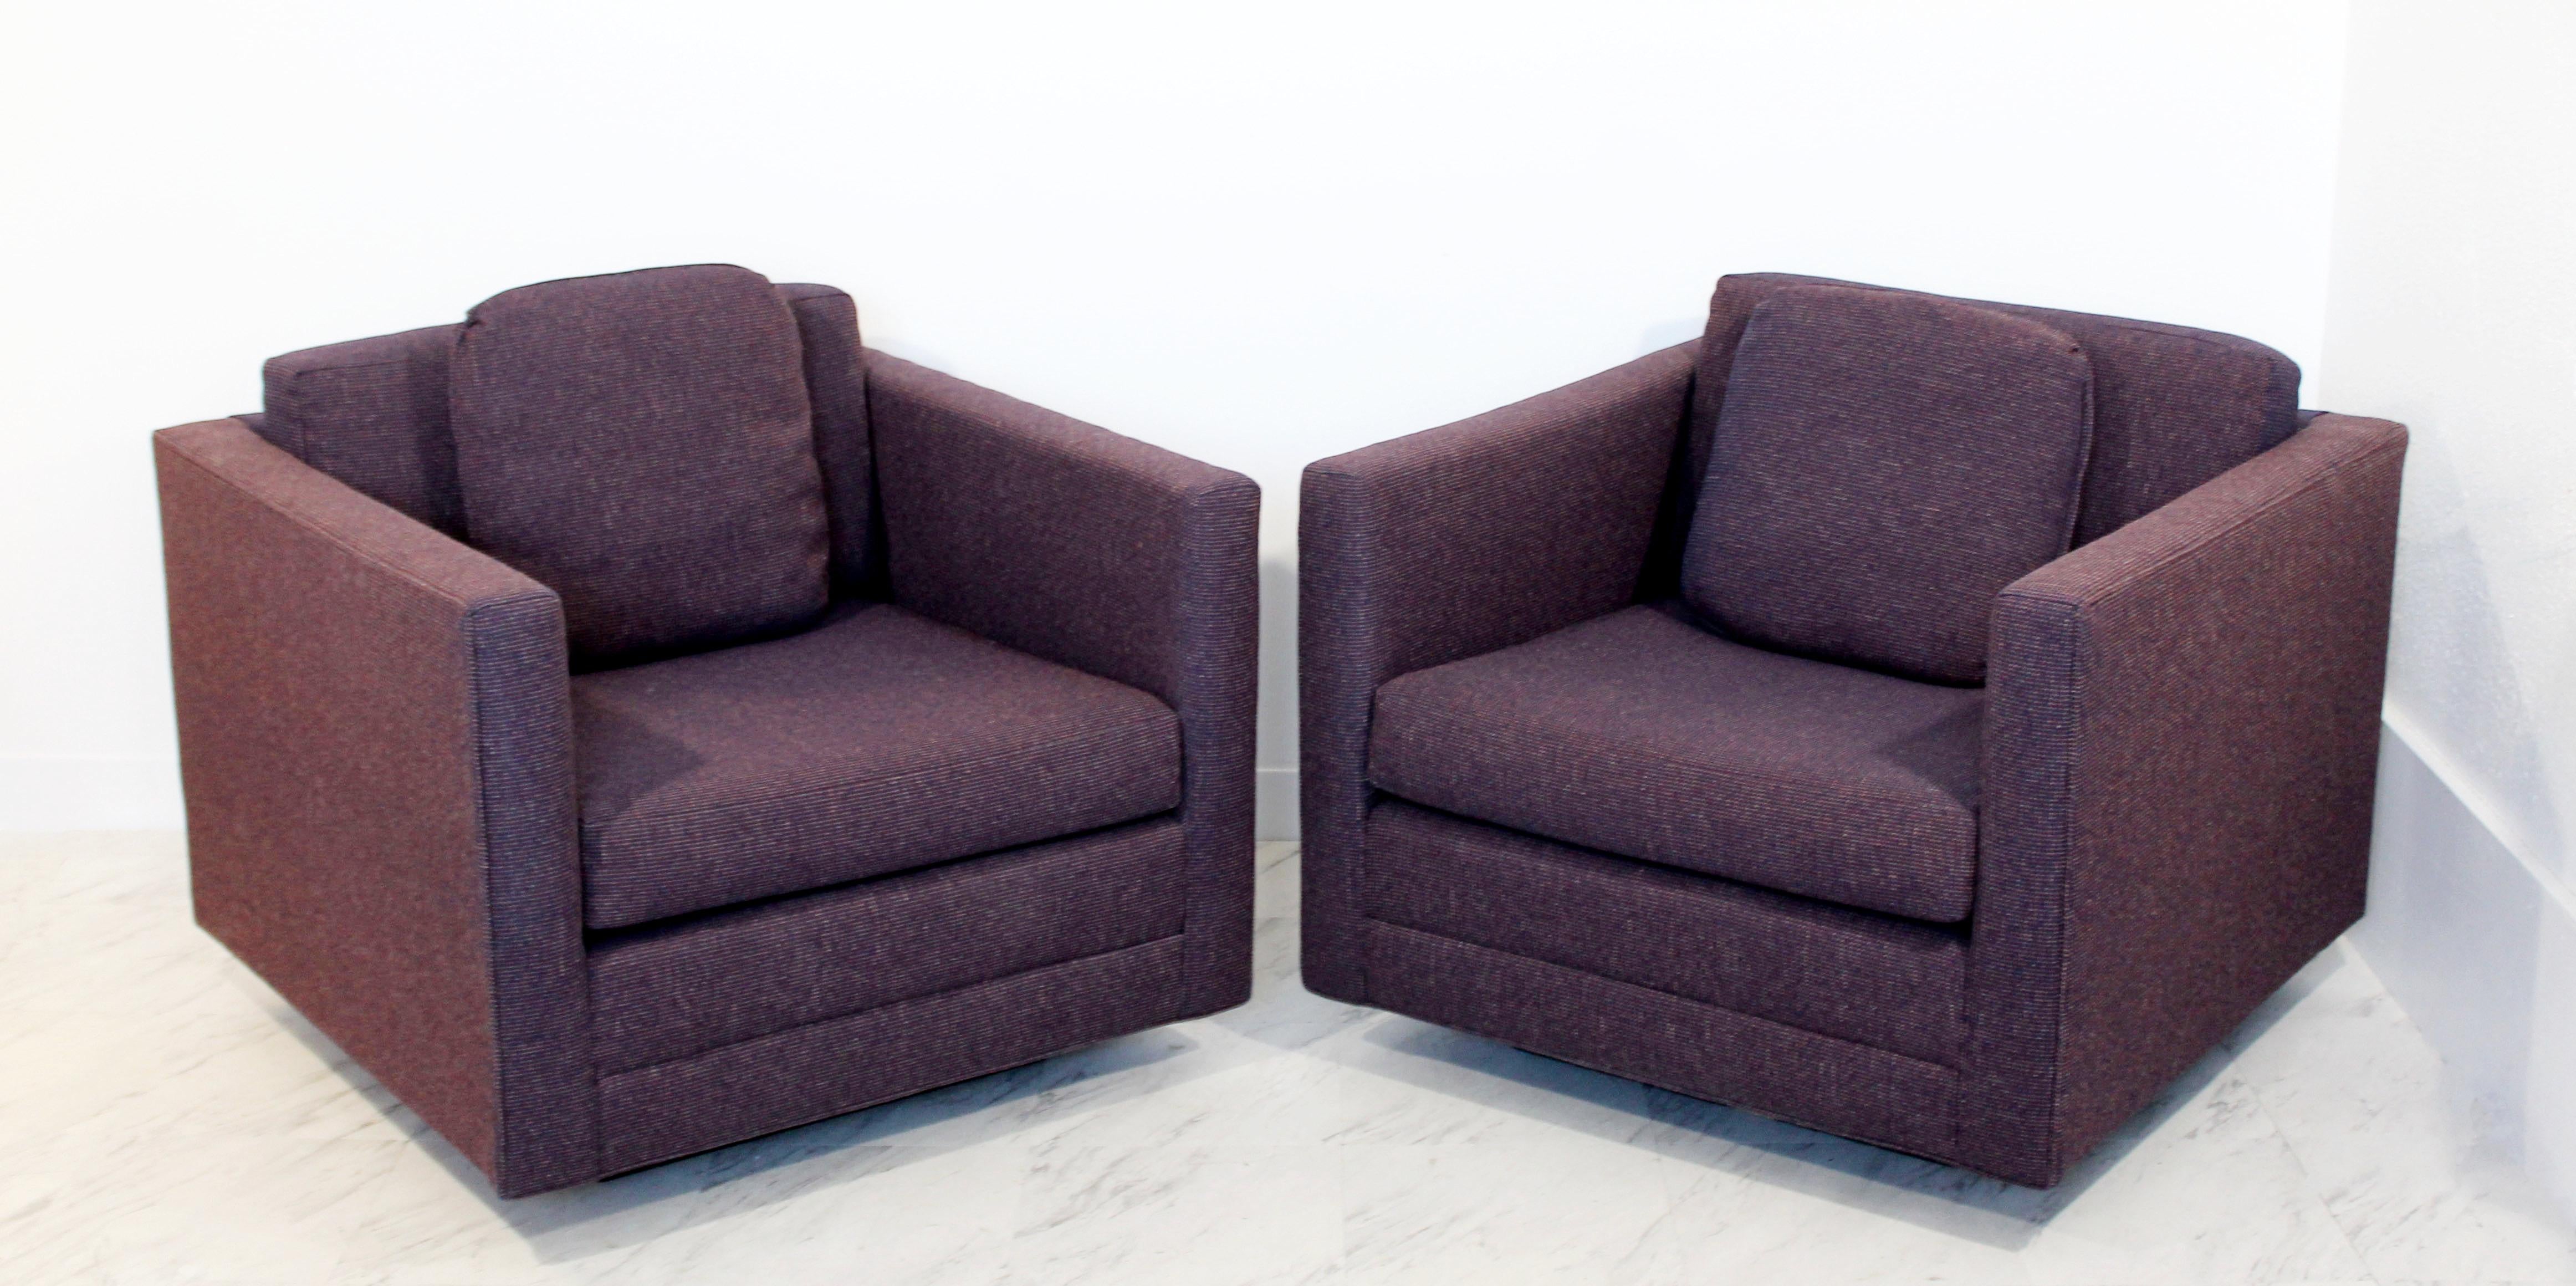 For your consideration is a fantastic pair of purple, floating cubes chairs, on plinth bases, by Edward Axel Roffman, circa the 1960s. In excellent condition. The dimensions are 32.5